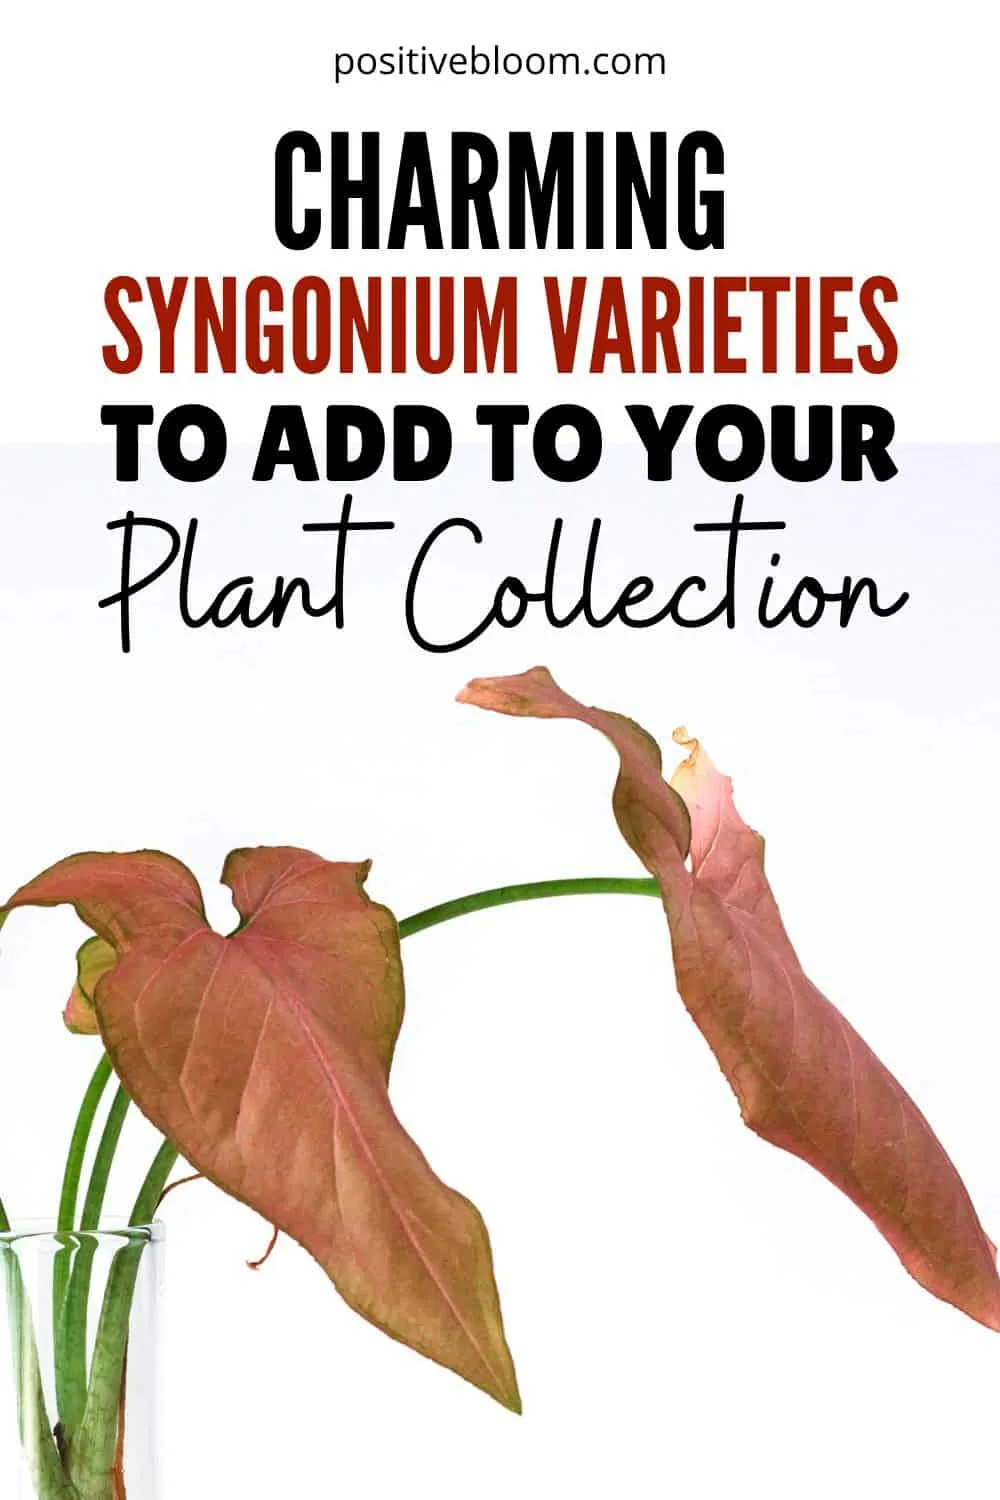 Charming Syngonium Varieties To Add To Your Plant Collection Pinterest